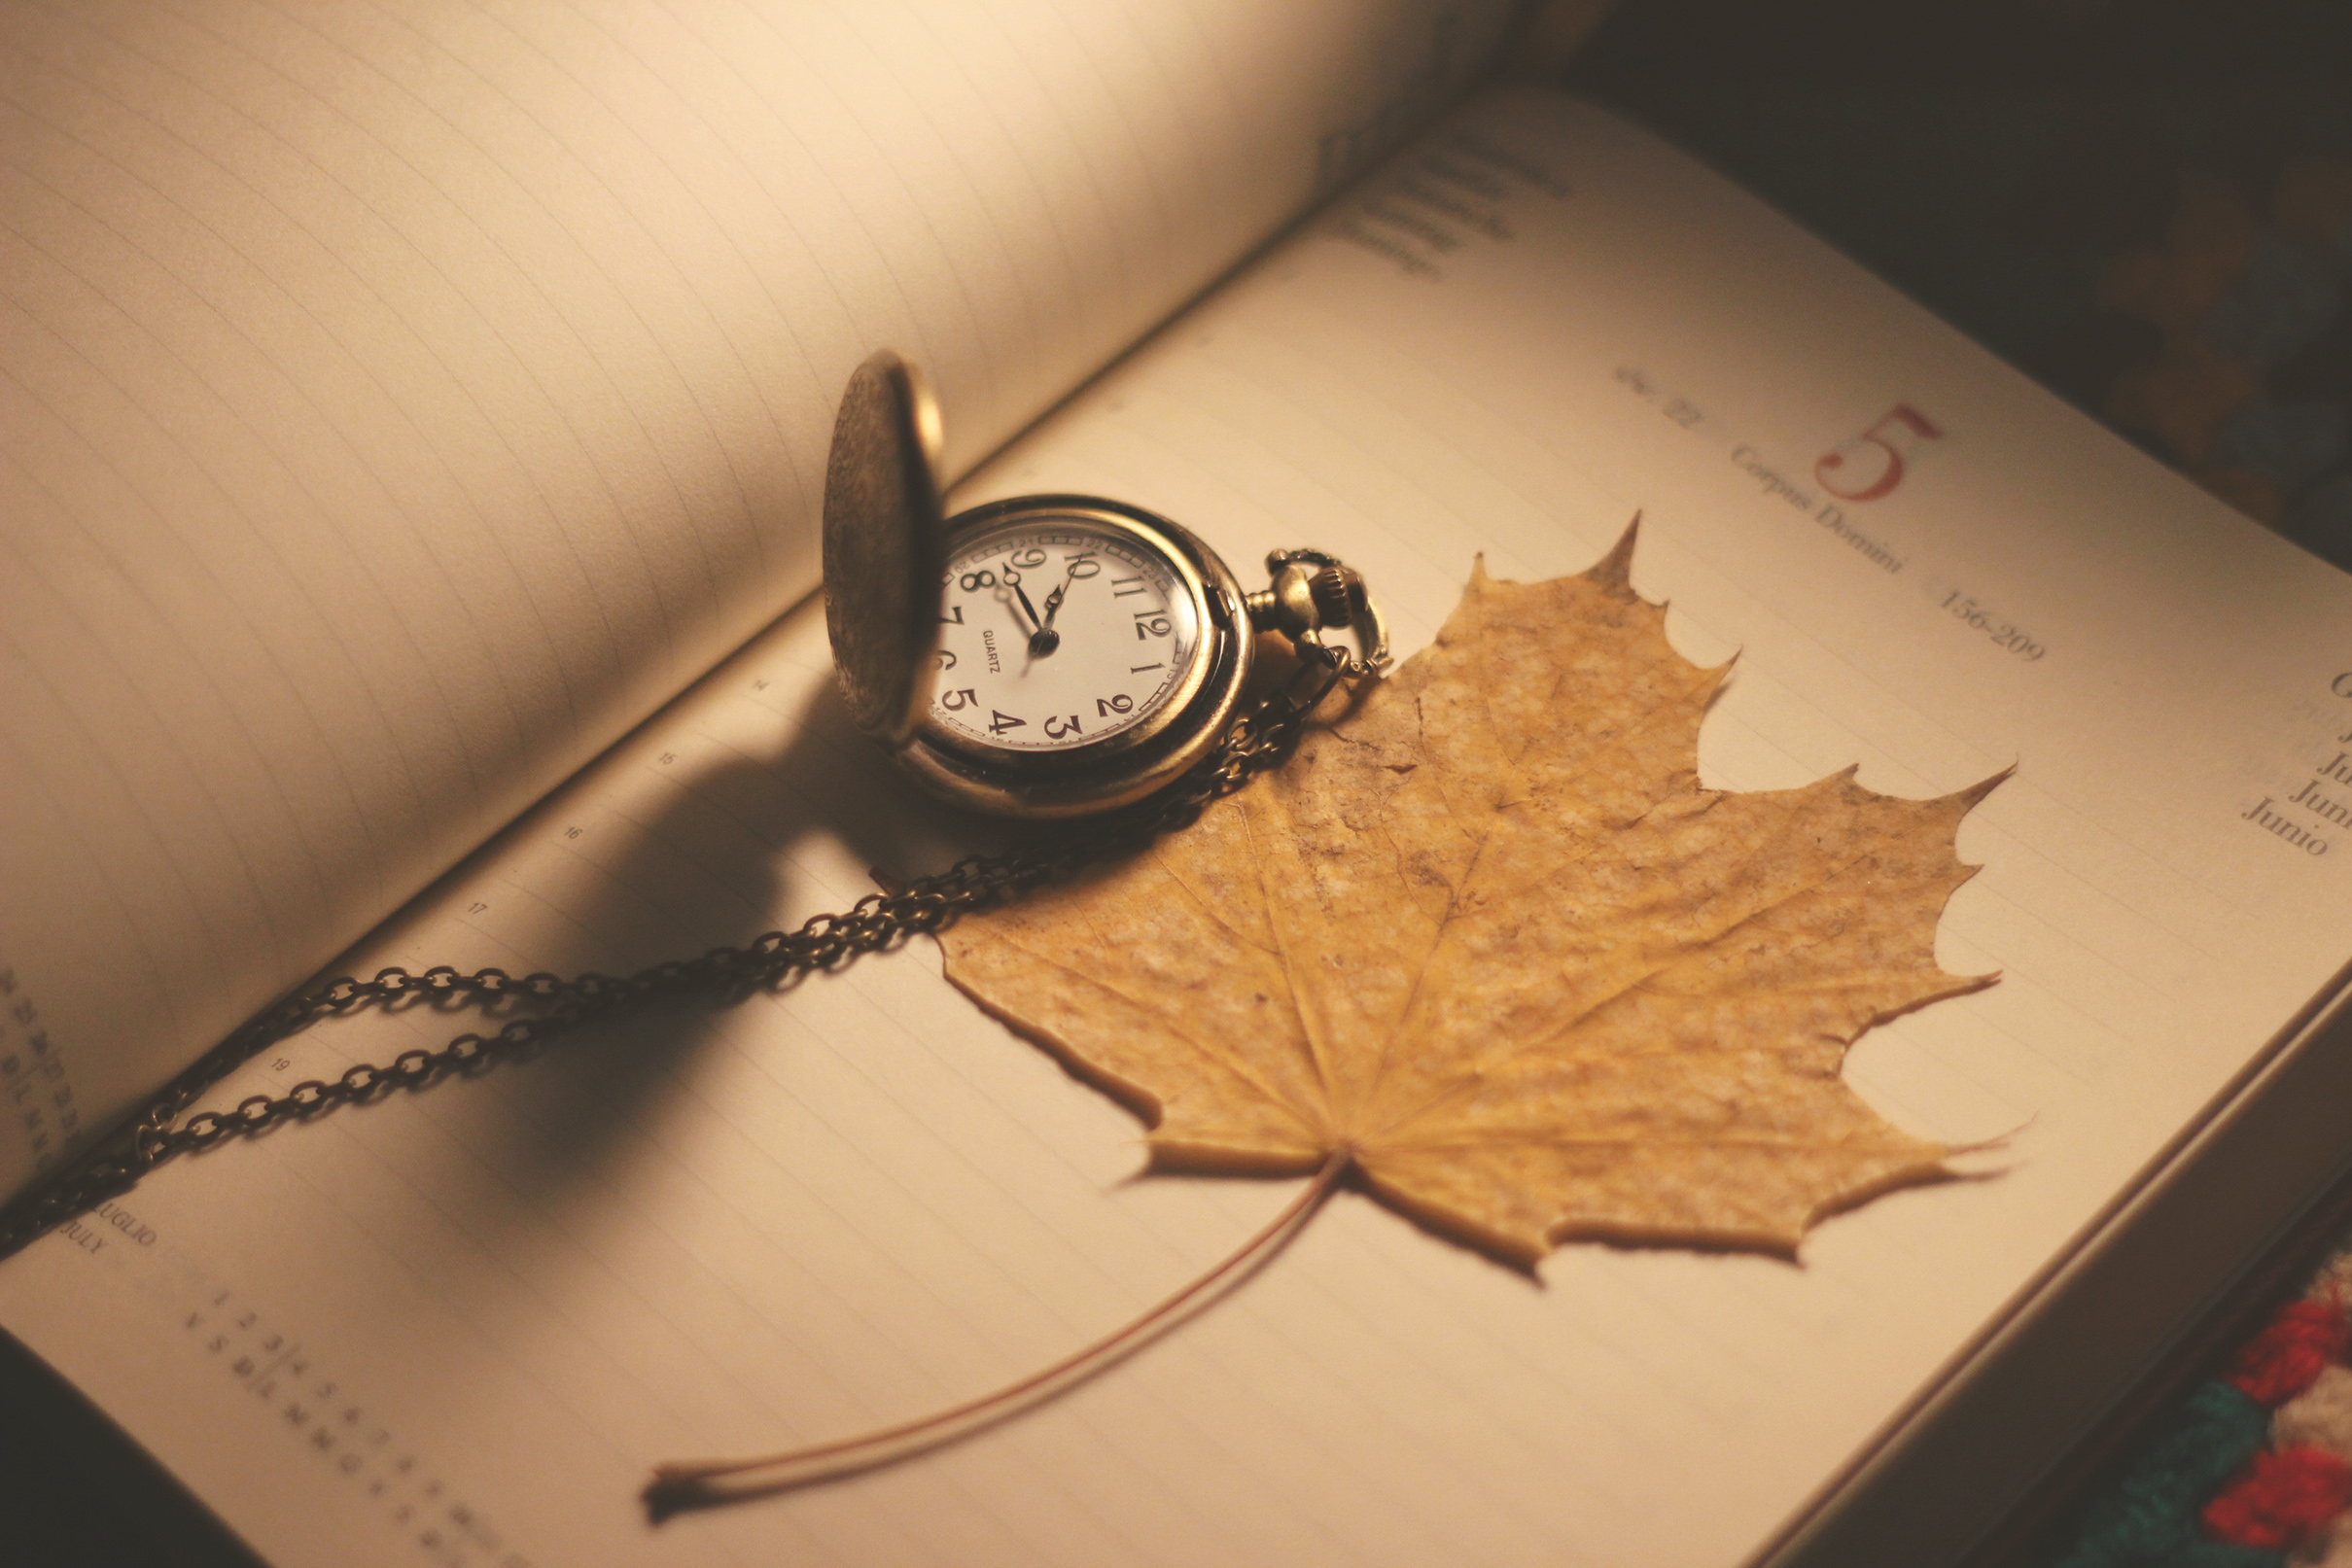 2419x1613 Wallpaper : old, Canon, vintage, leaf, time, antique, diary, watch, pocketwatch, t3i 935174 HD Wallpapers